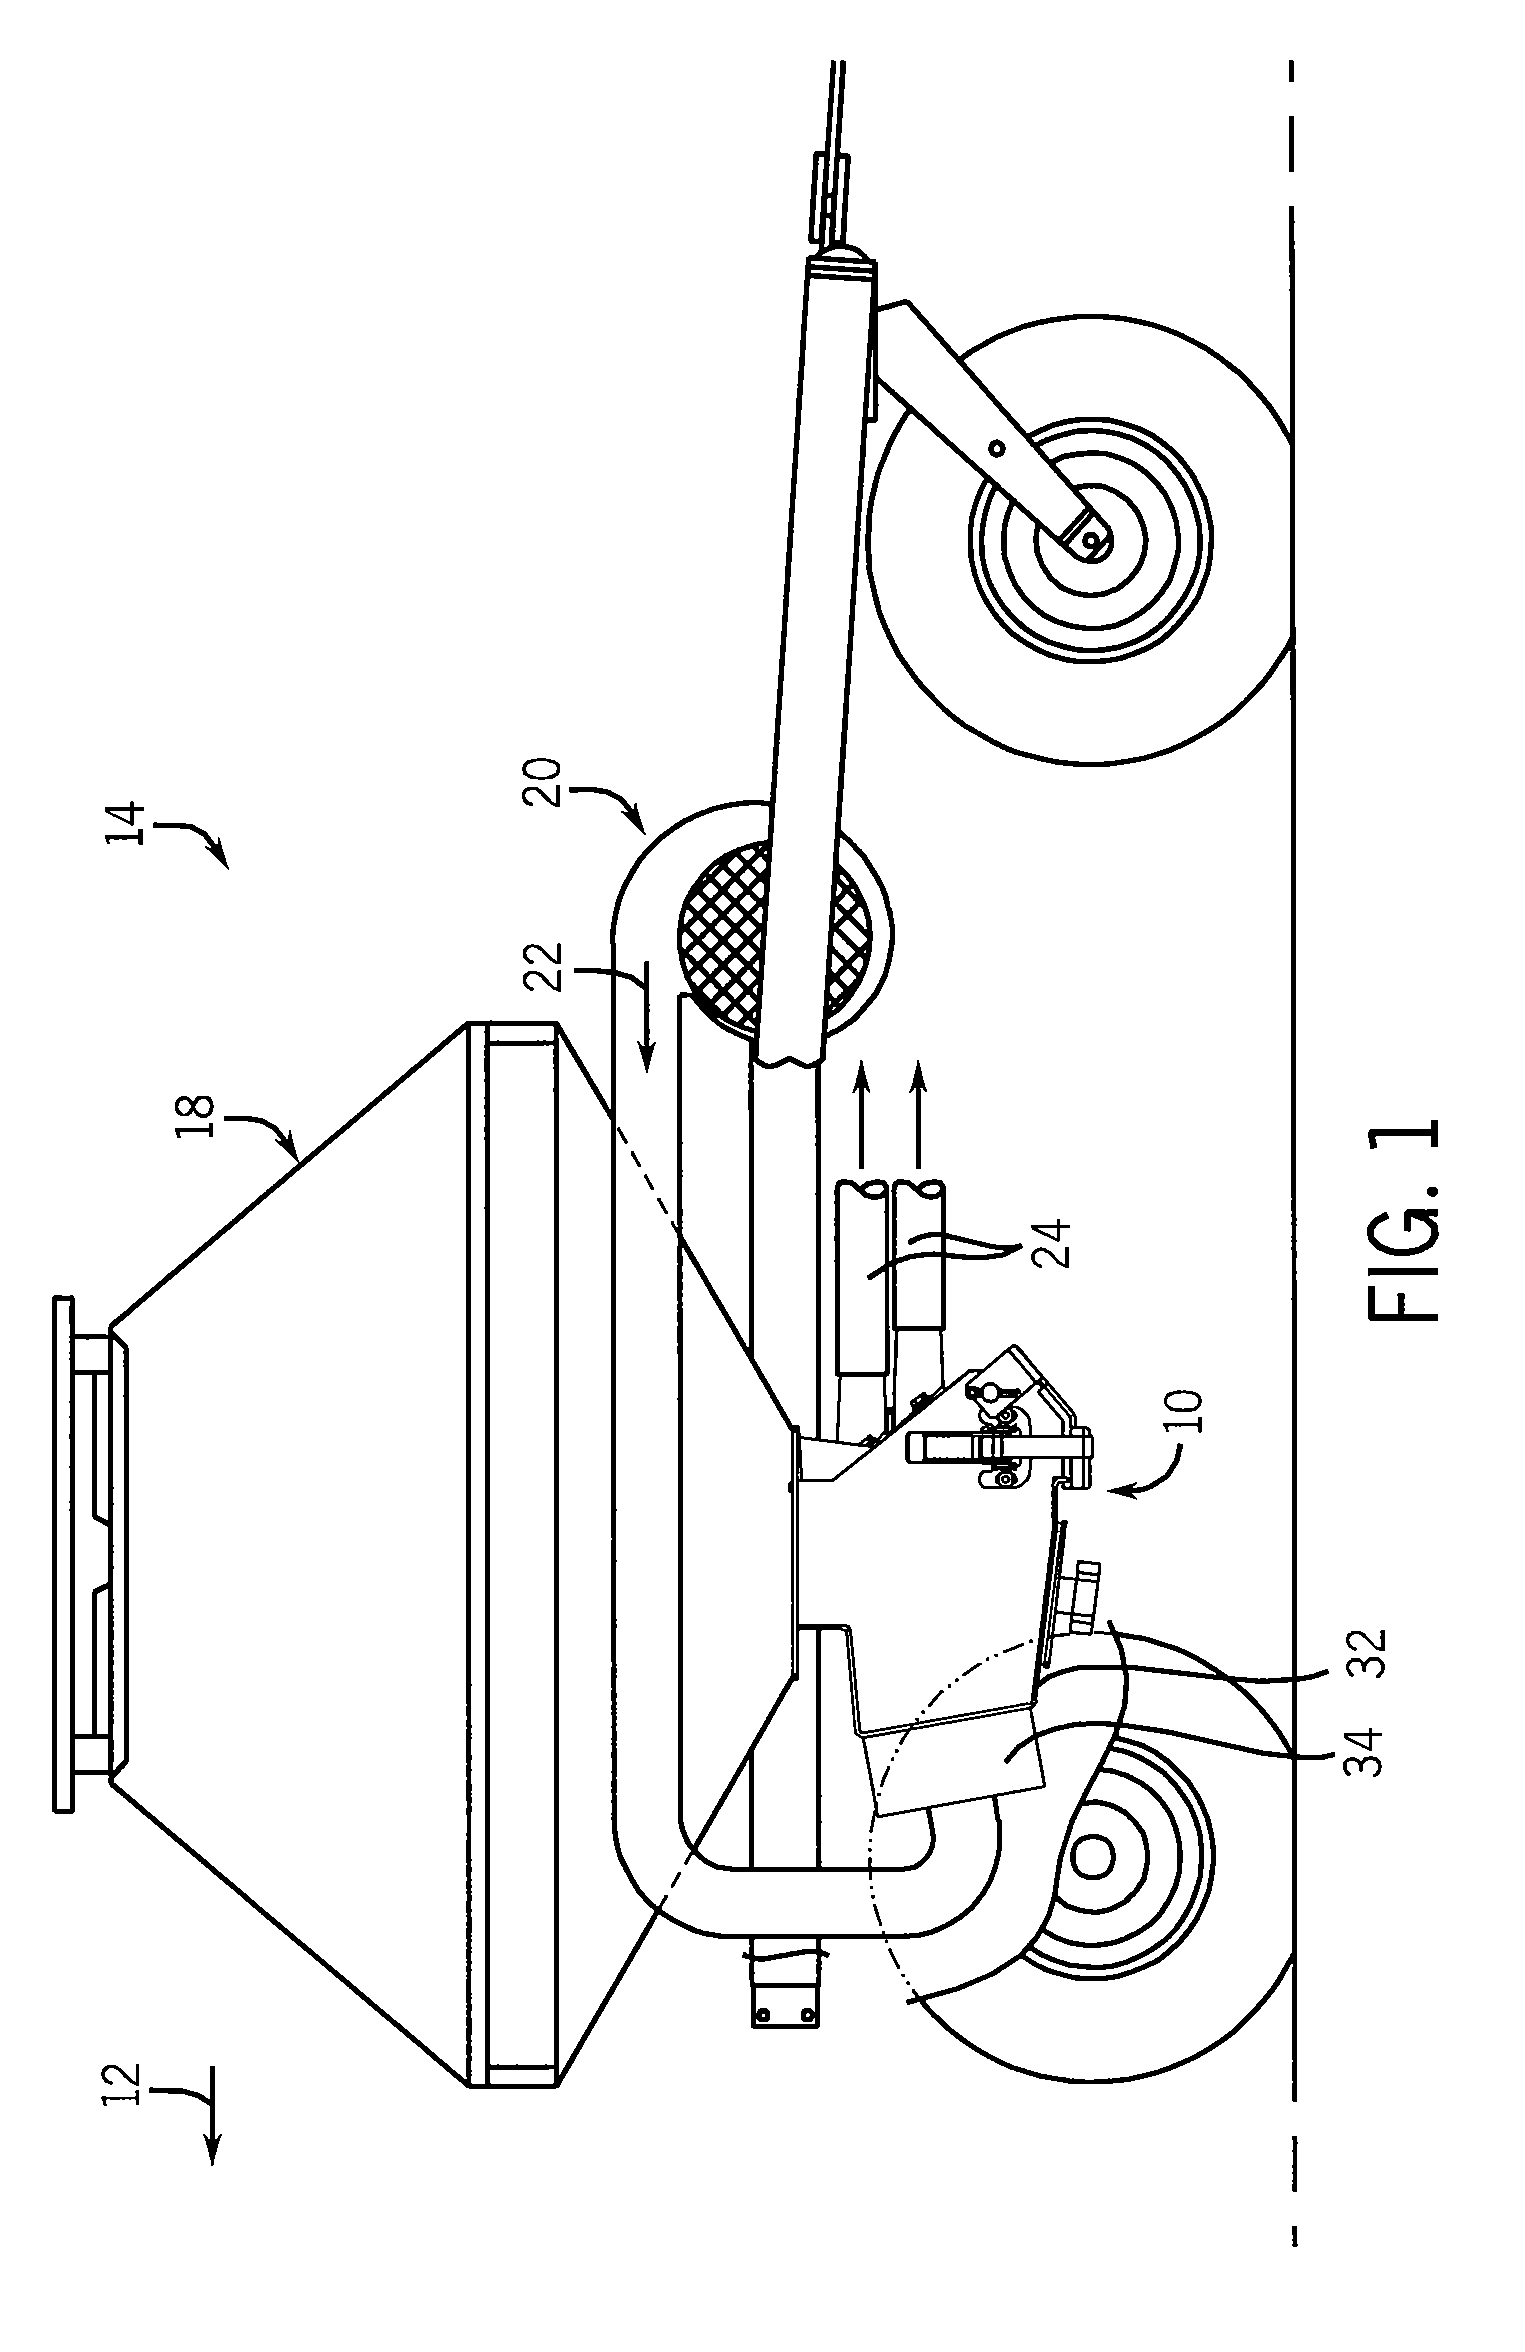 Inductor Assembly For A Product Conveyance System